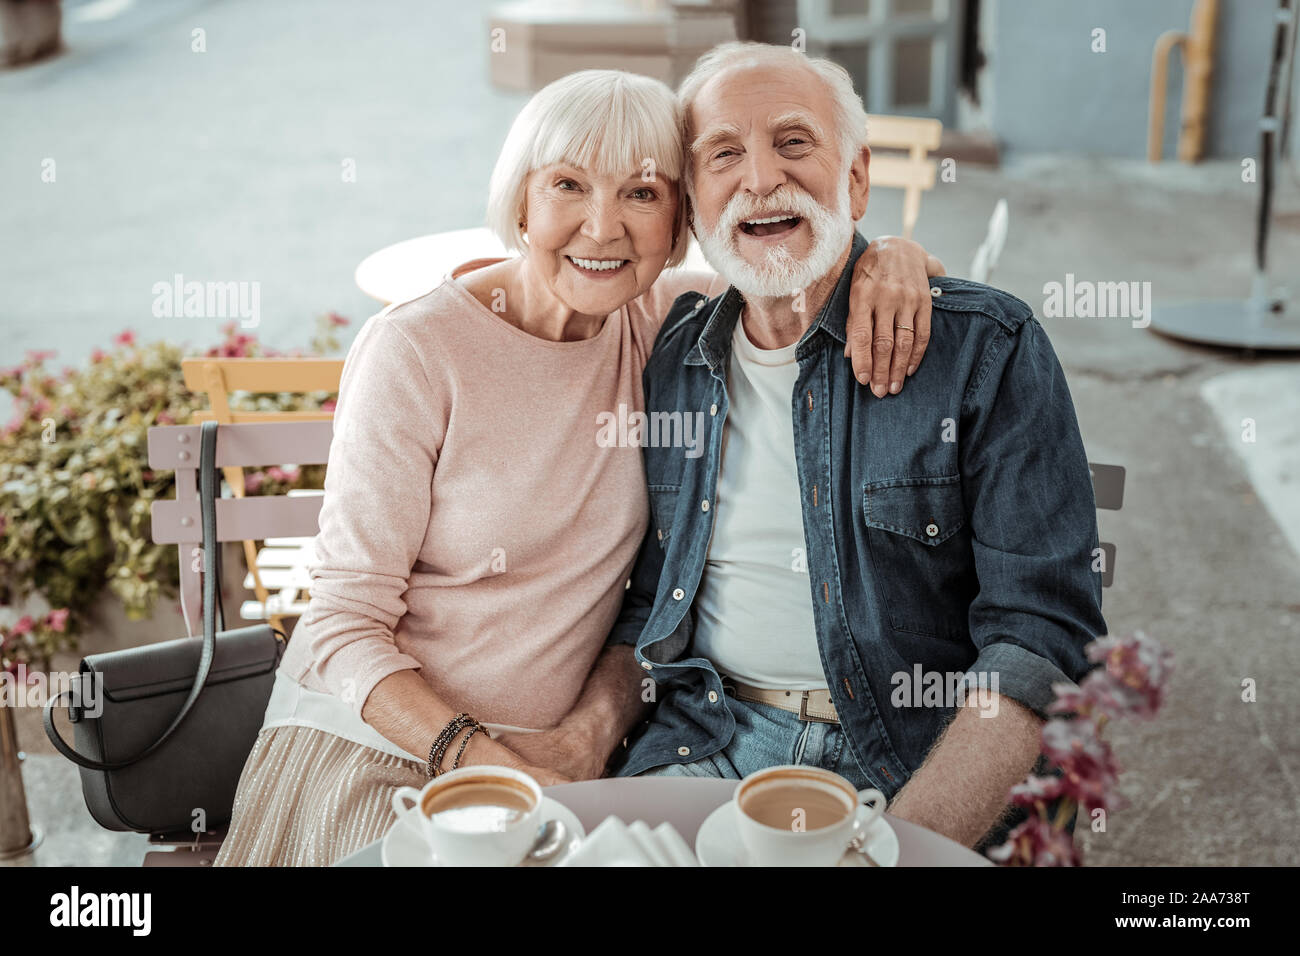 Delighted nice couple enjoying their time together Stock Photo